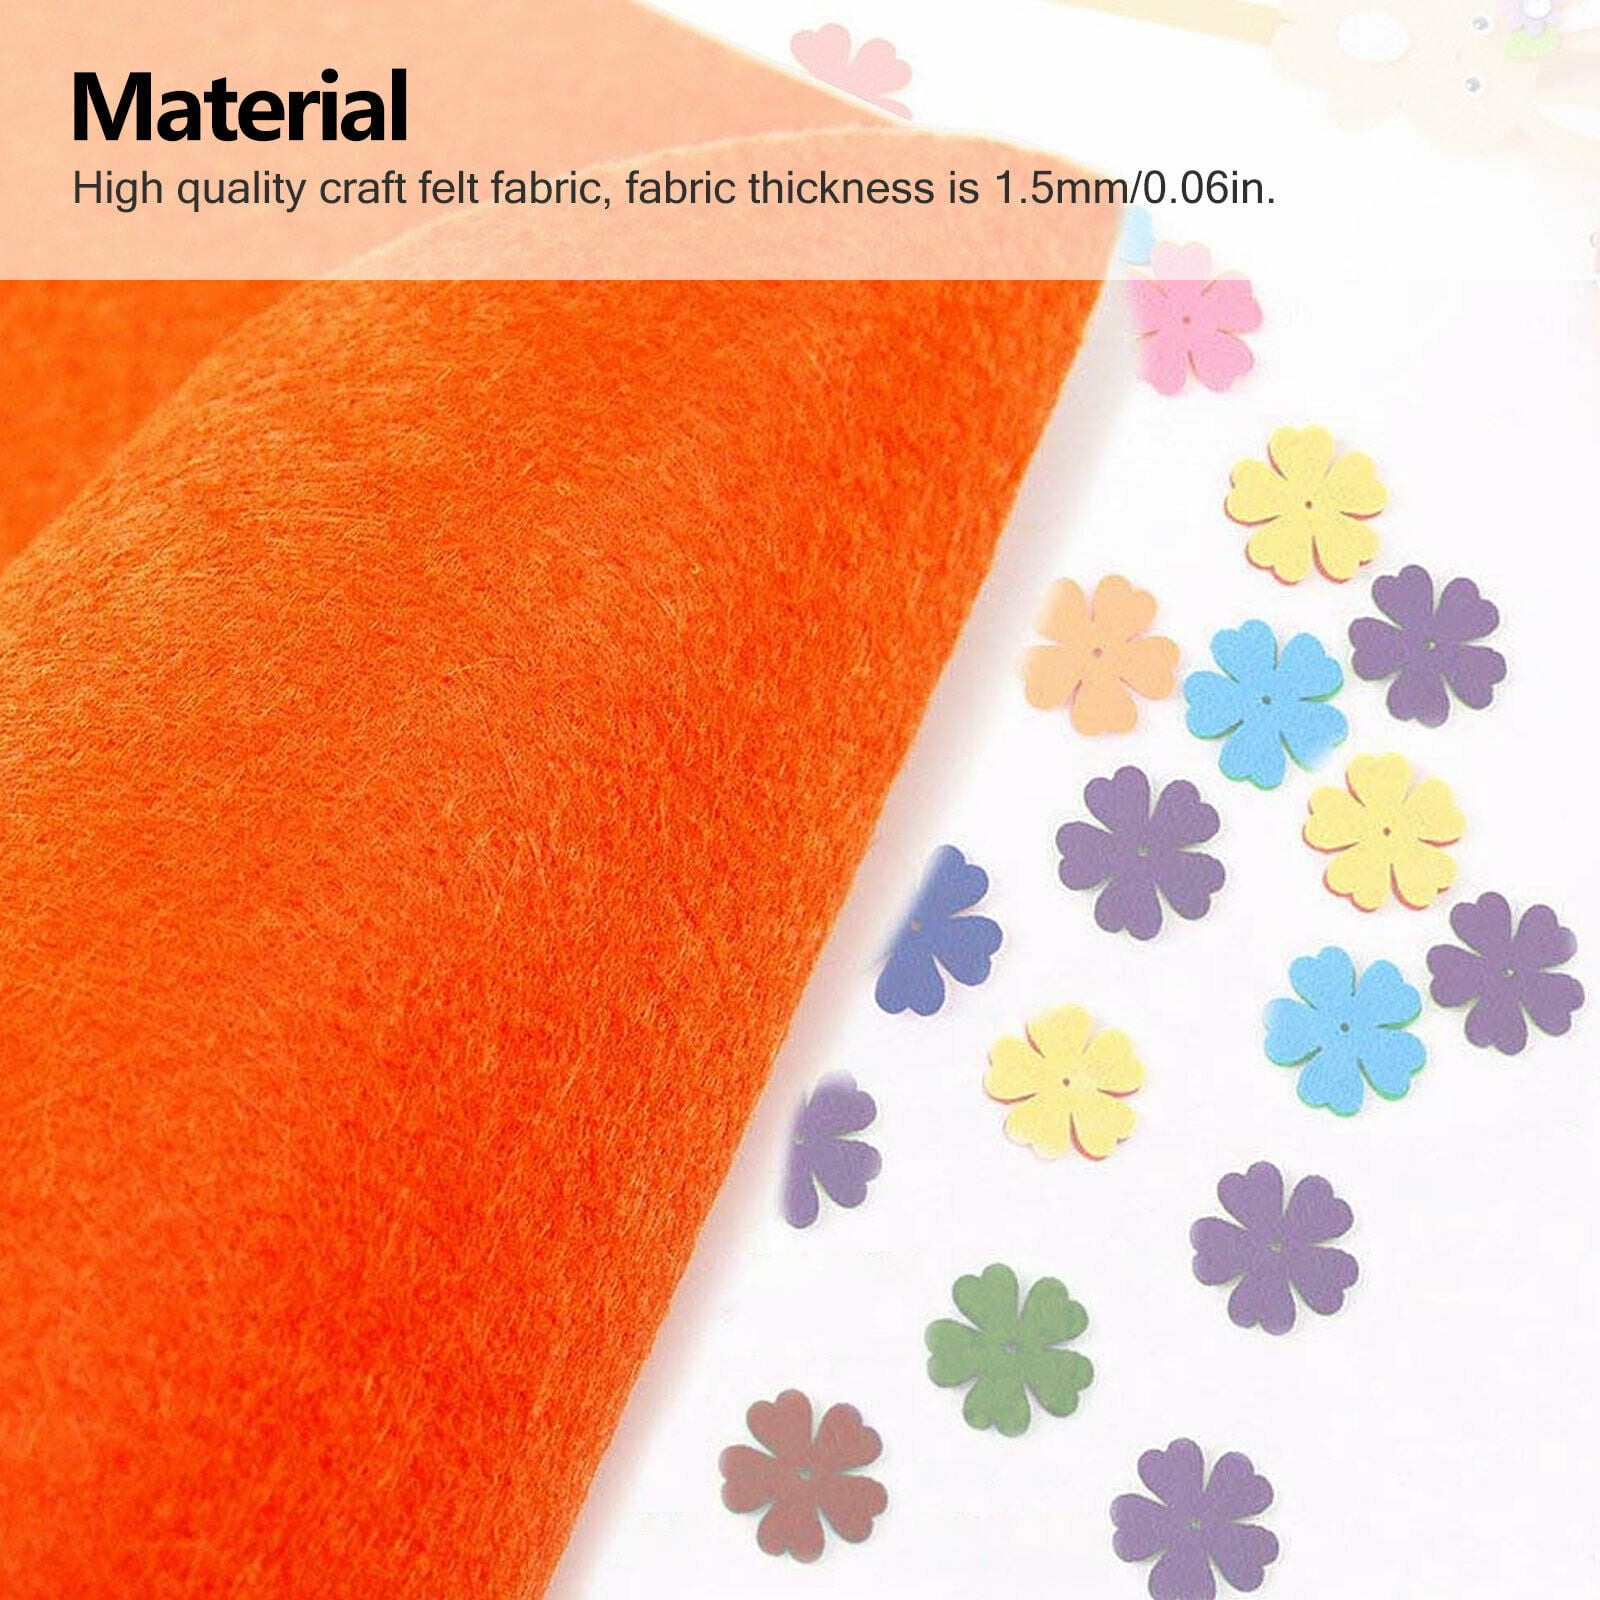 Patterned Felt Sheets Assorted Colors 6x6 inch 1mm Thick 40pcs Total DIY  Craft